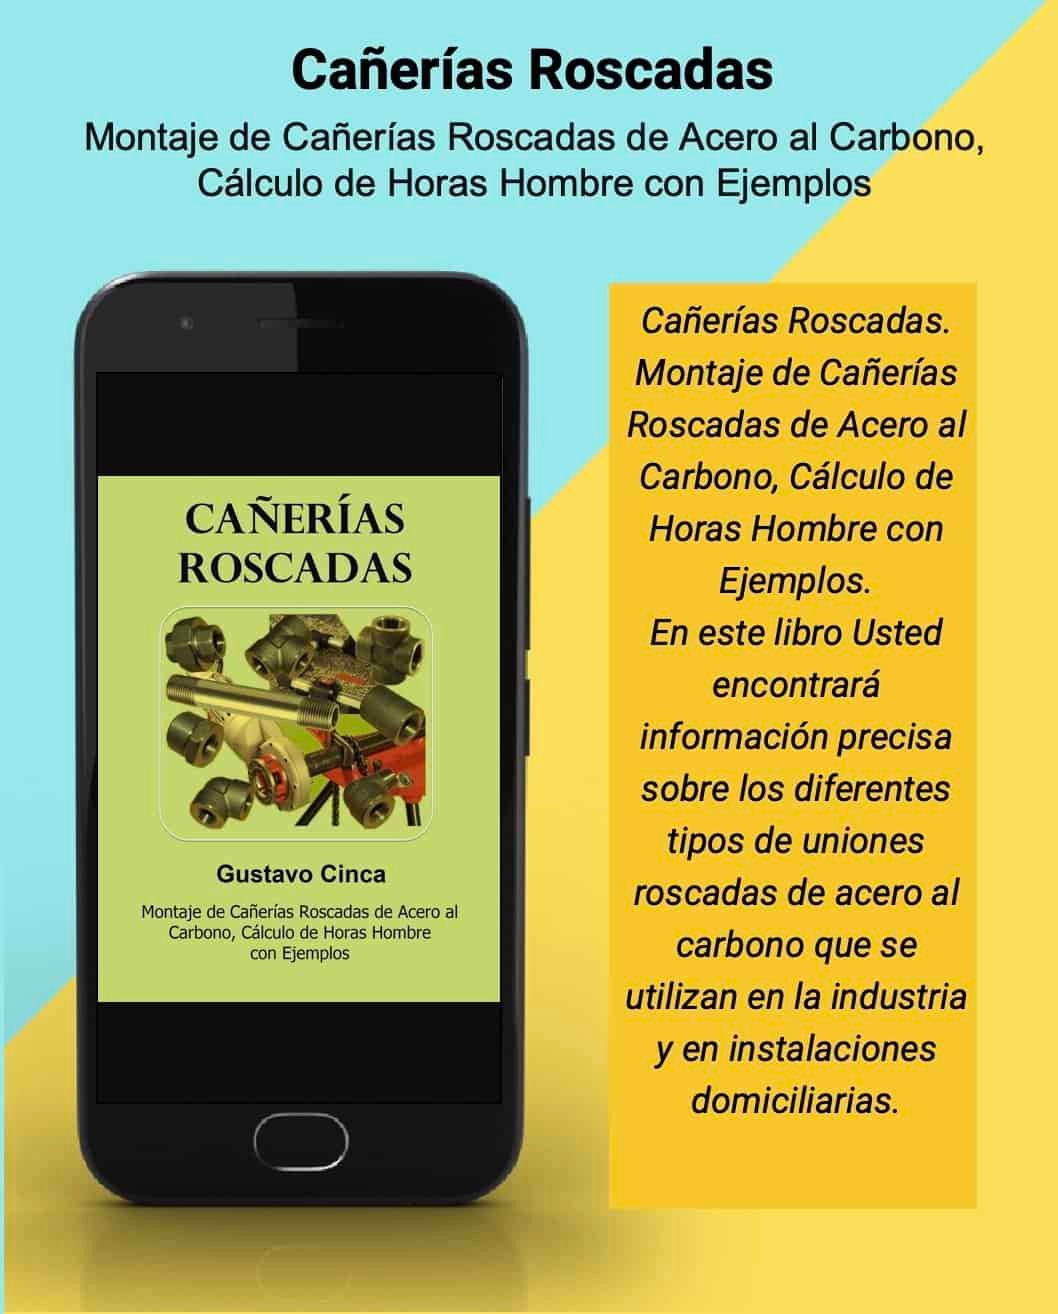 The figure displays a booklet with the cover and a brief description of the book. Cañerías Roscadas